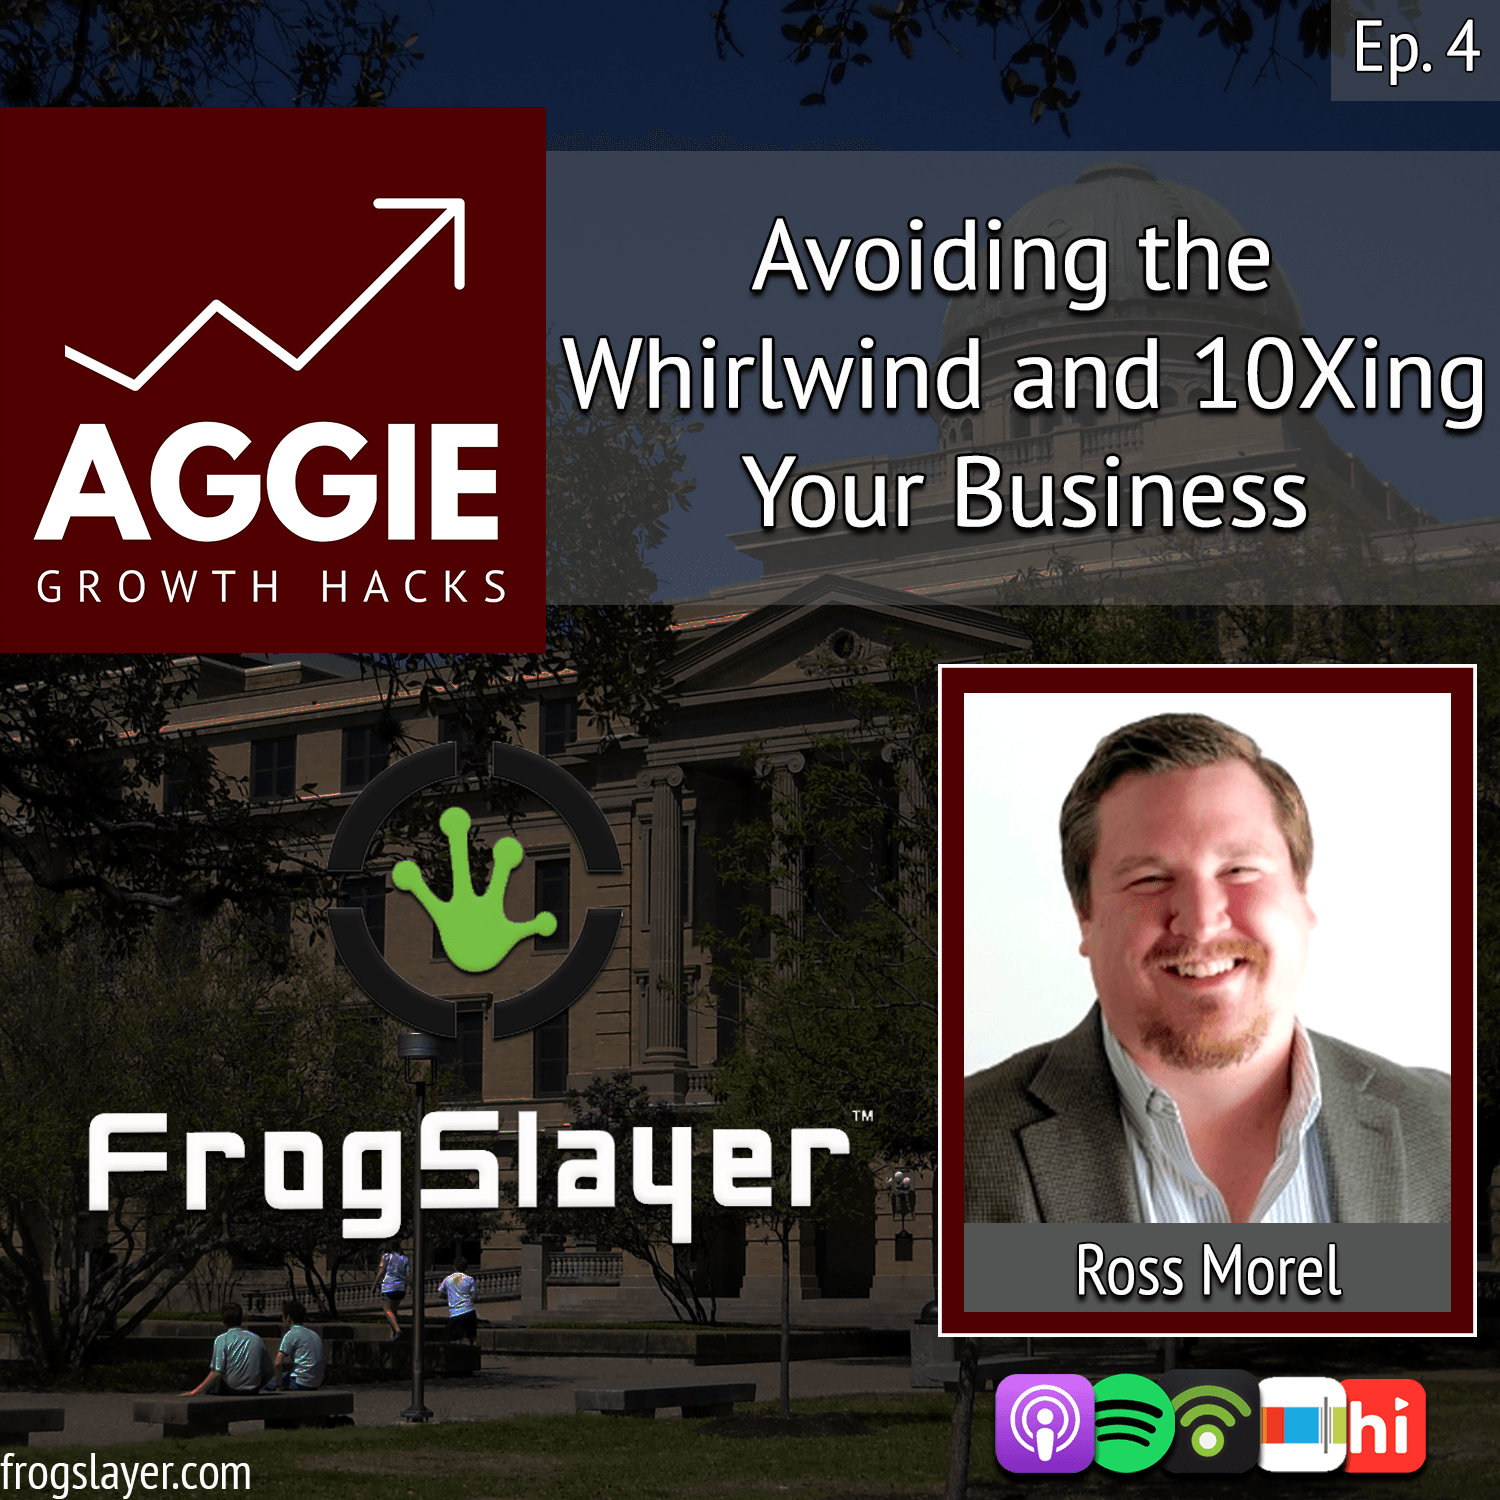 Frogslayer - Avoiding the Whirlwind and 10xing Your Business